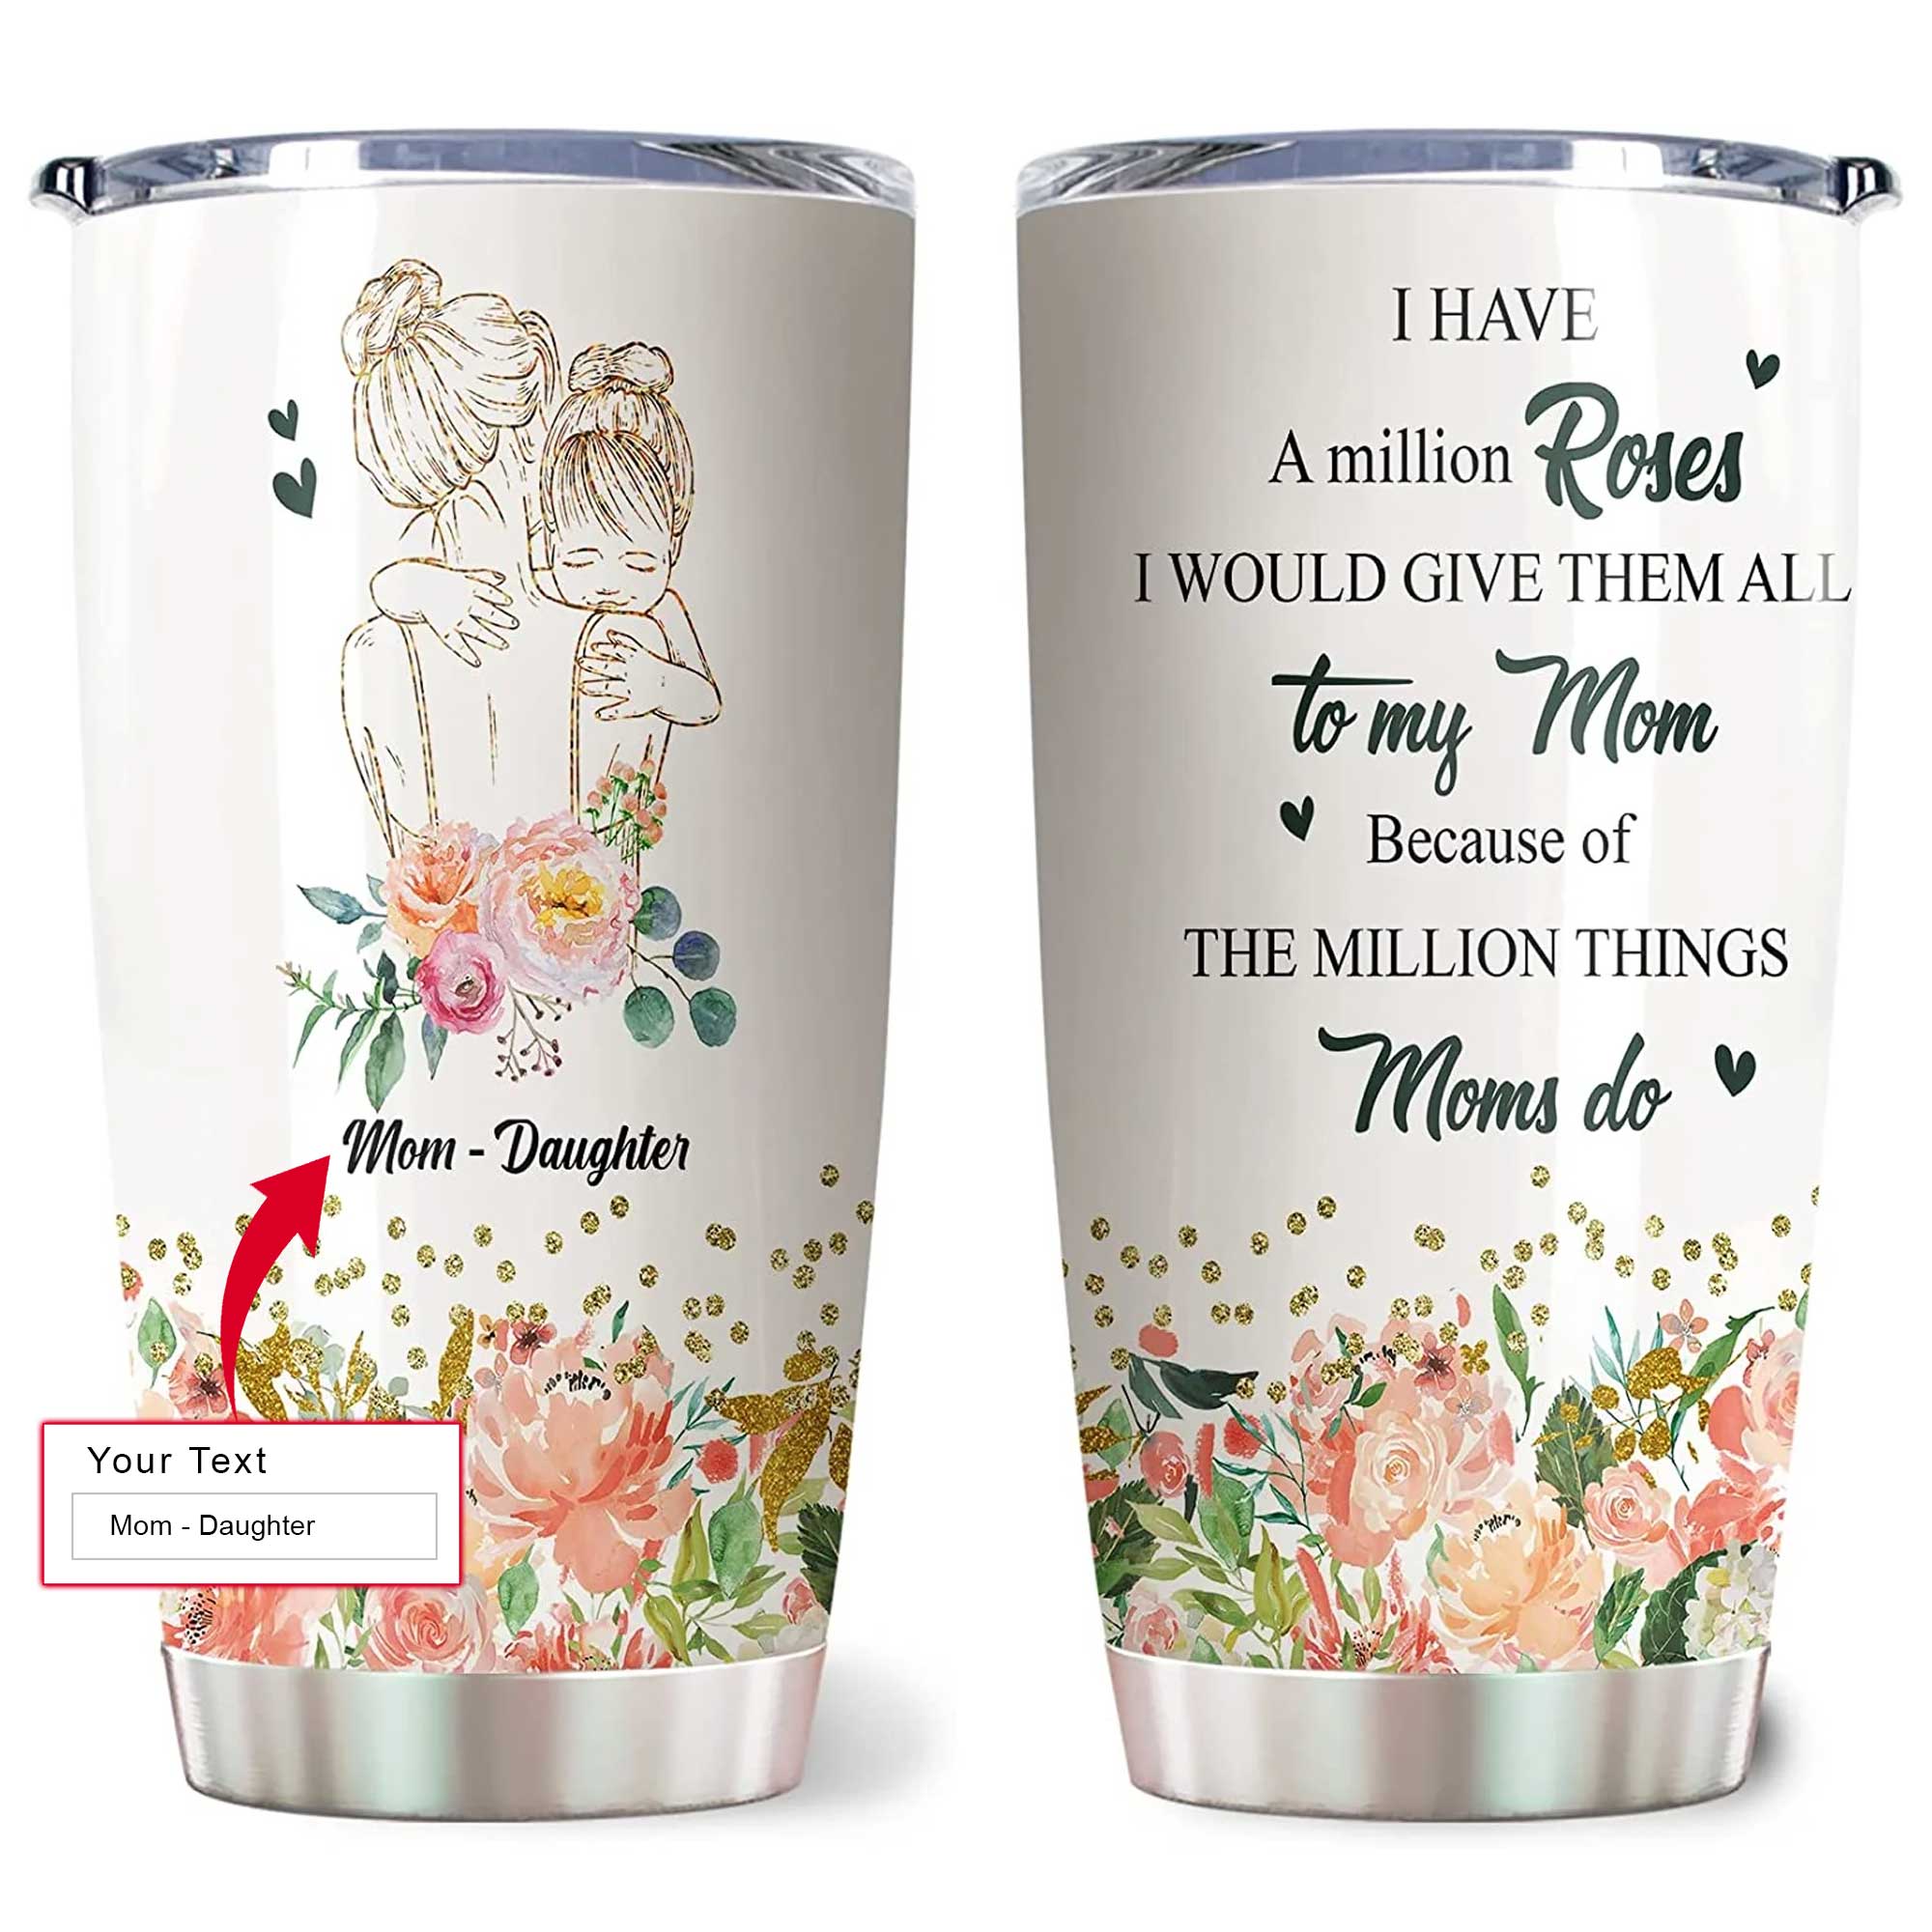 Personalized Mother's Day Gift Tumbler - Custom Gift For Mother's Day, Presents for Mom - To My Mom, The Million Things Moms Do Tumbler